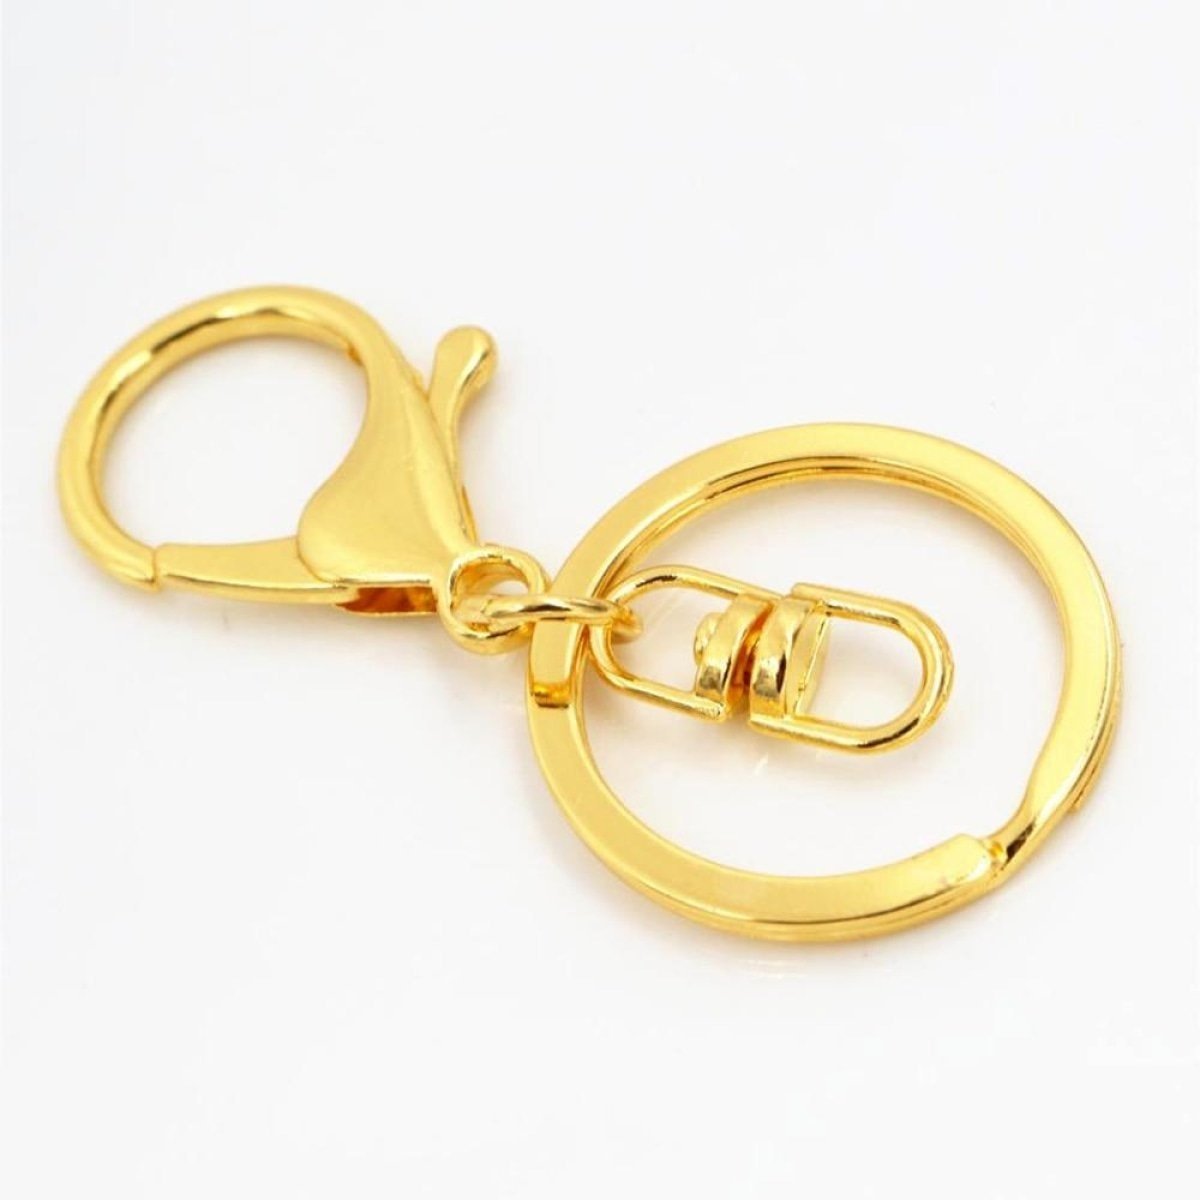 5Pcs 30Mm Key Ring Long 70Mm Plated Lobster Clasp Hook Chain Jewellery Making Keychain Rings